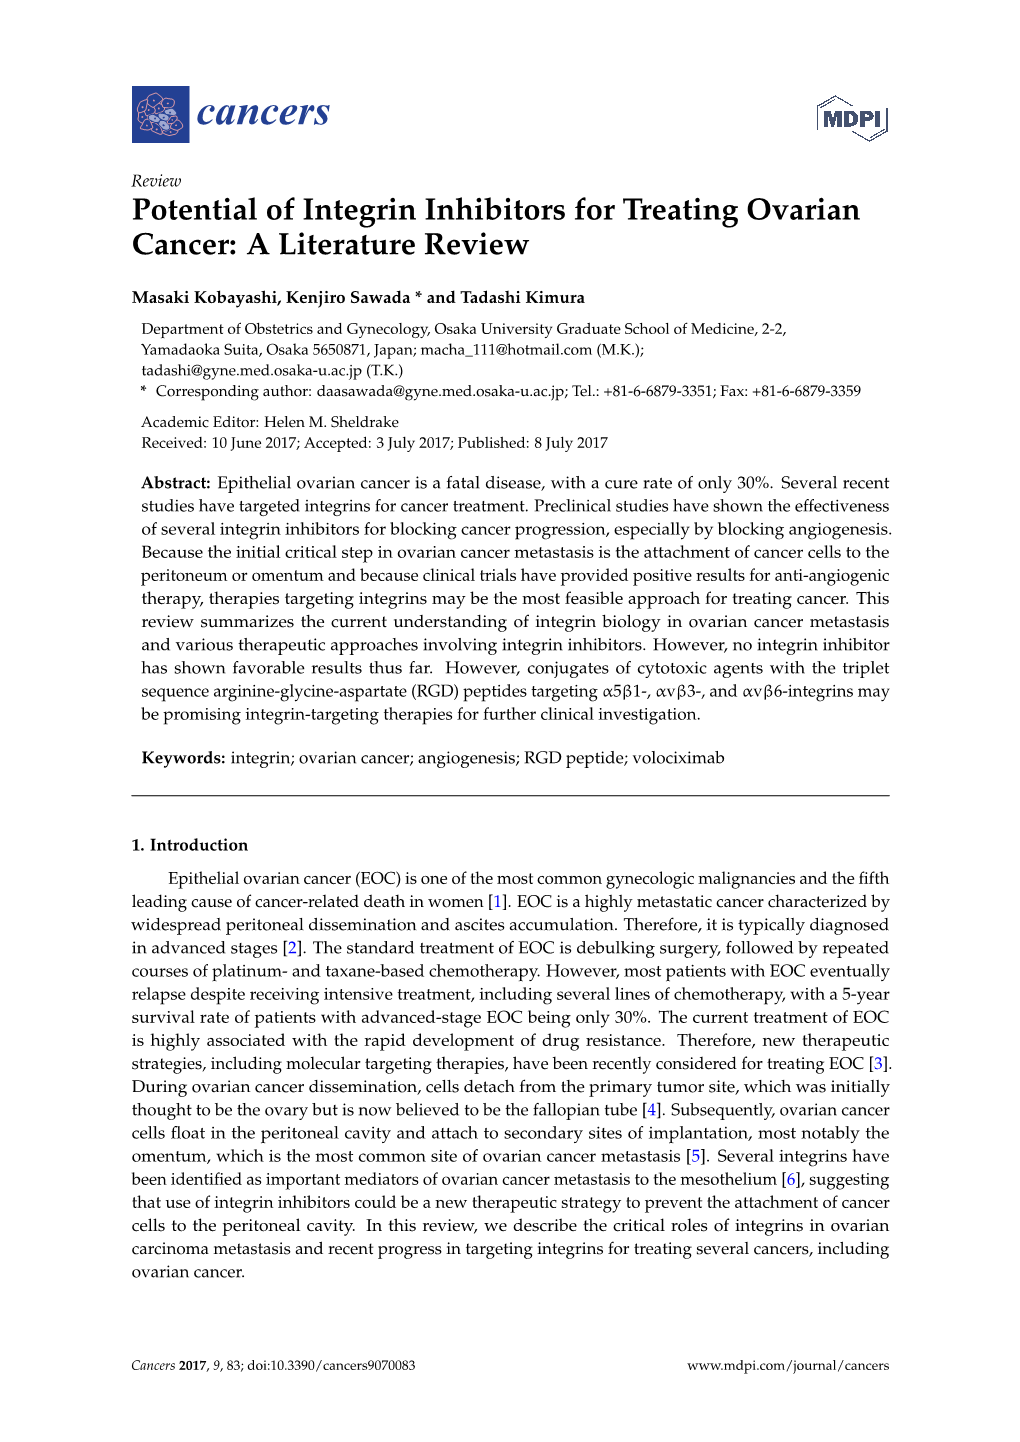 Potential of Integrin Inhibitors for Treating Ovarian Cancer: a Literature Review